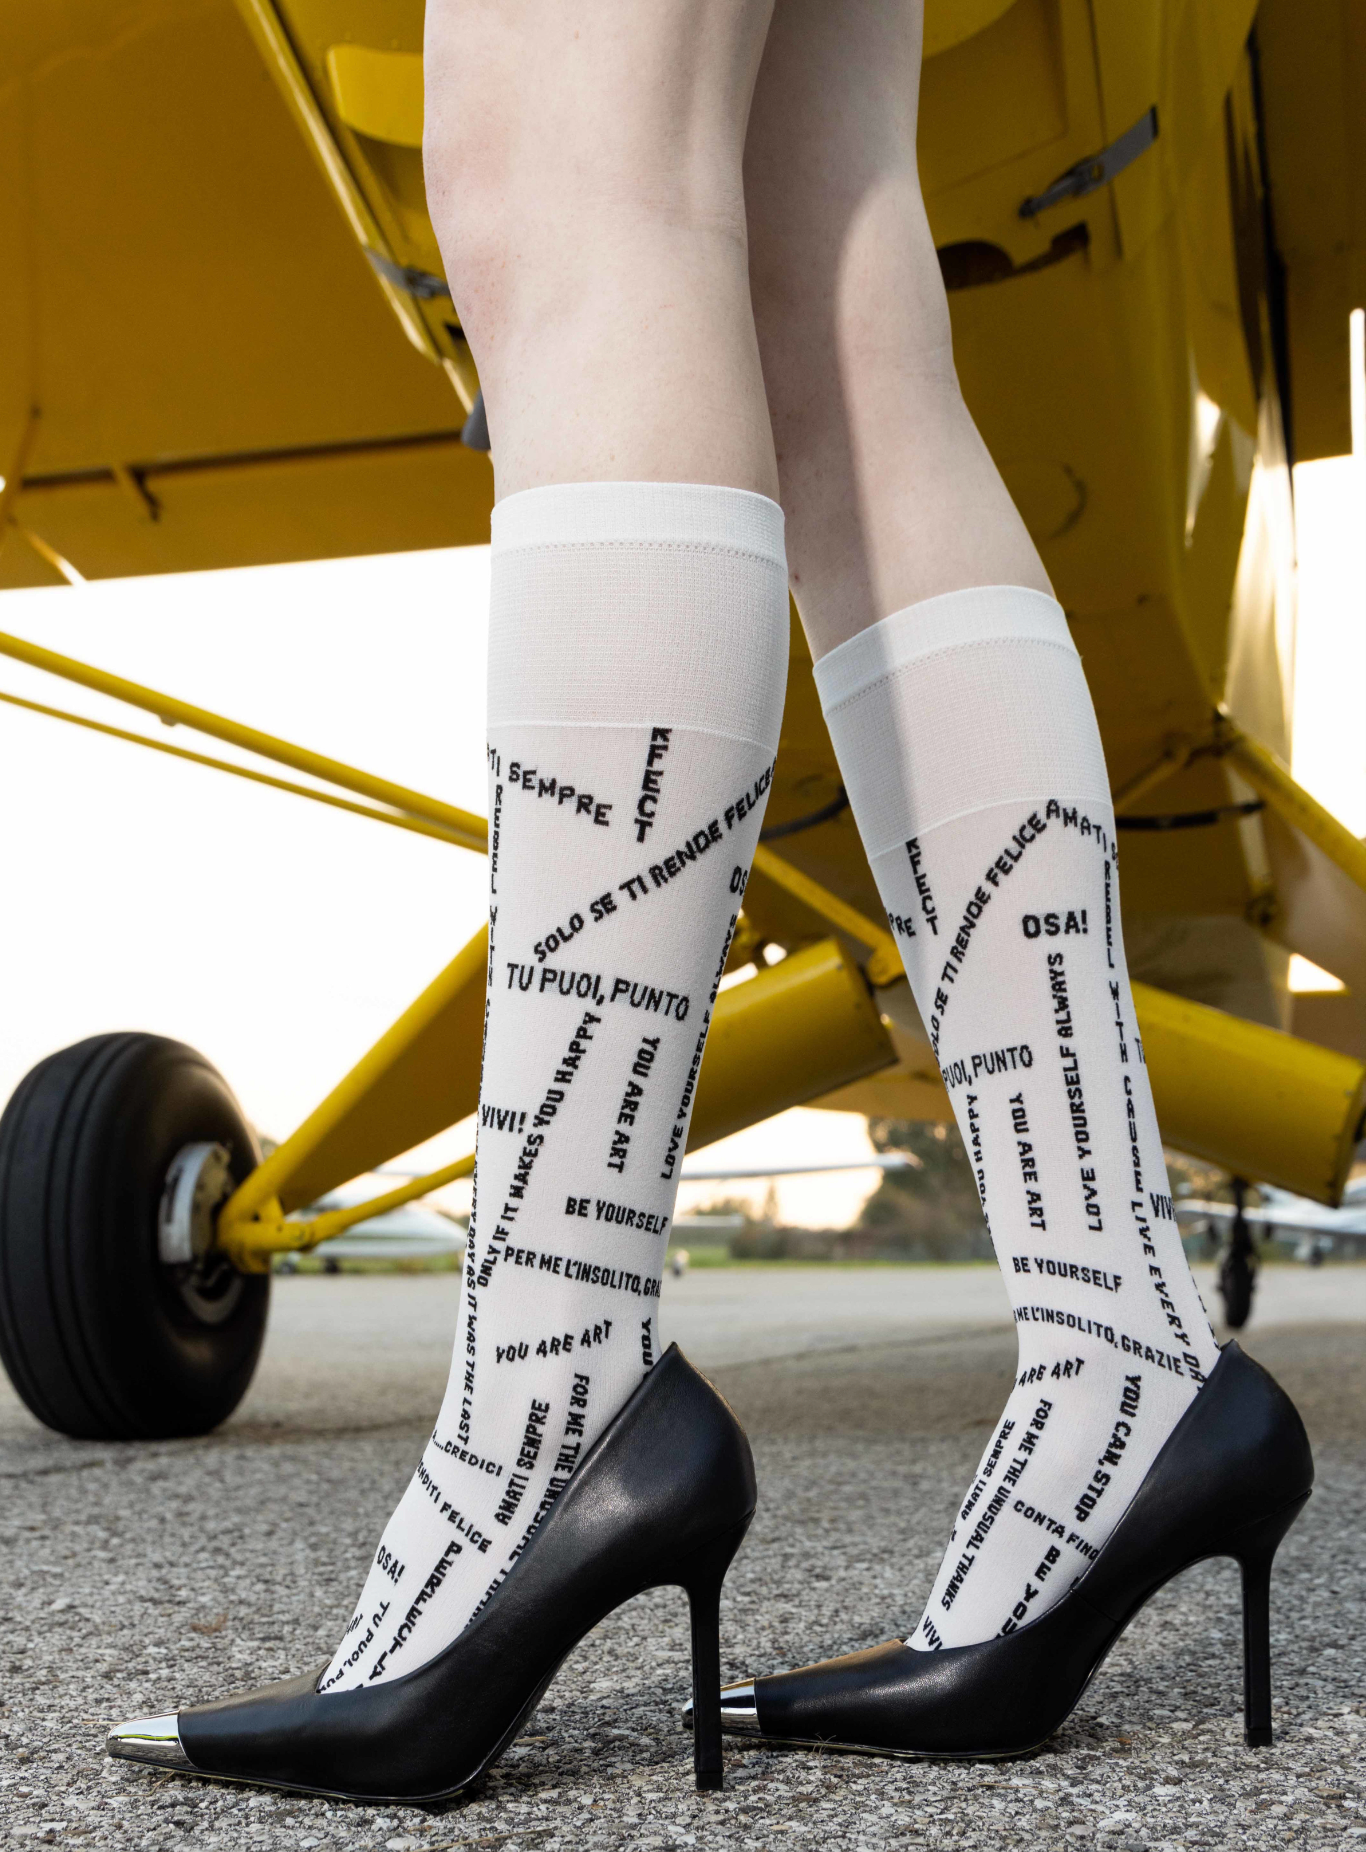 Trasparenze Las Vegas Knee-High Socks - White opaque fashion knee-high socks with slogans and motivational text woven pattern in black in other languages.